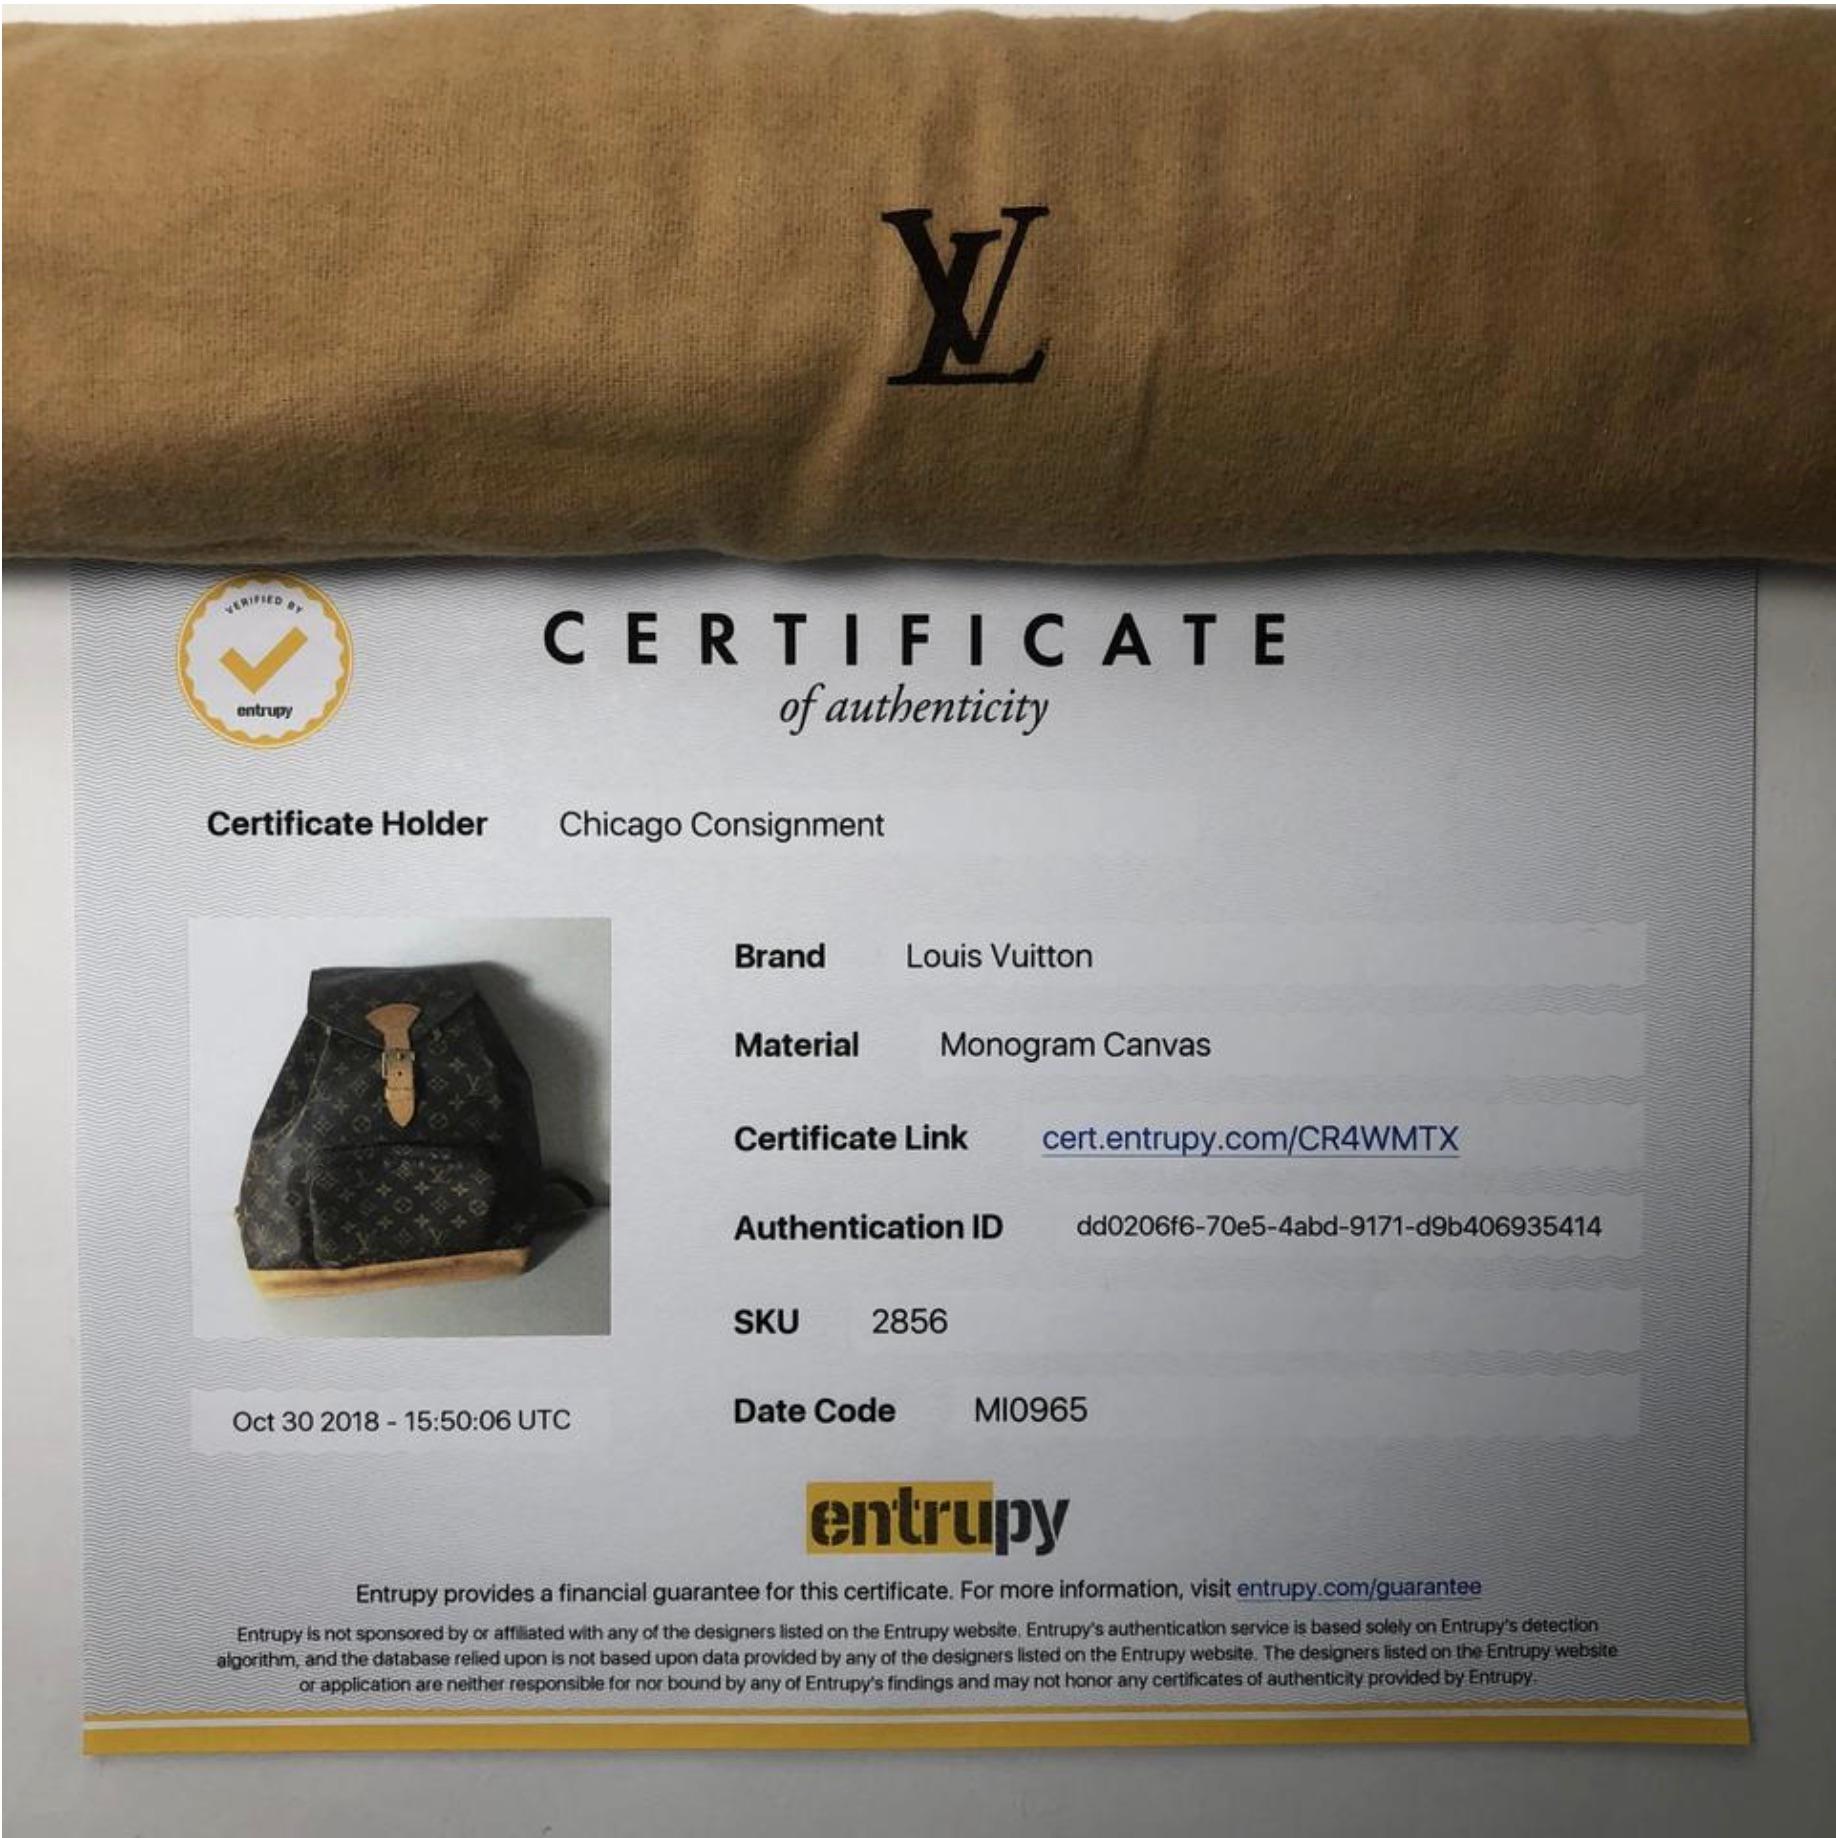 MODEL - Louis Vuitton Monogram Montsouris GM Backpack Handbag

CONDITION - Exceptional! Light to medium vachette, watermarks, no handle darkening, light dryness. Bright and shiny hardware with no tarnishing. No rips, holes, tears, stains or odors.